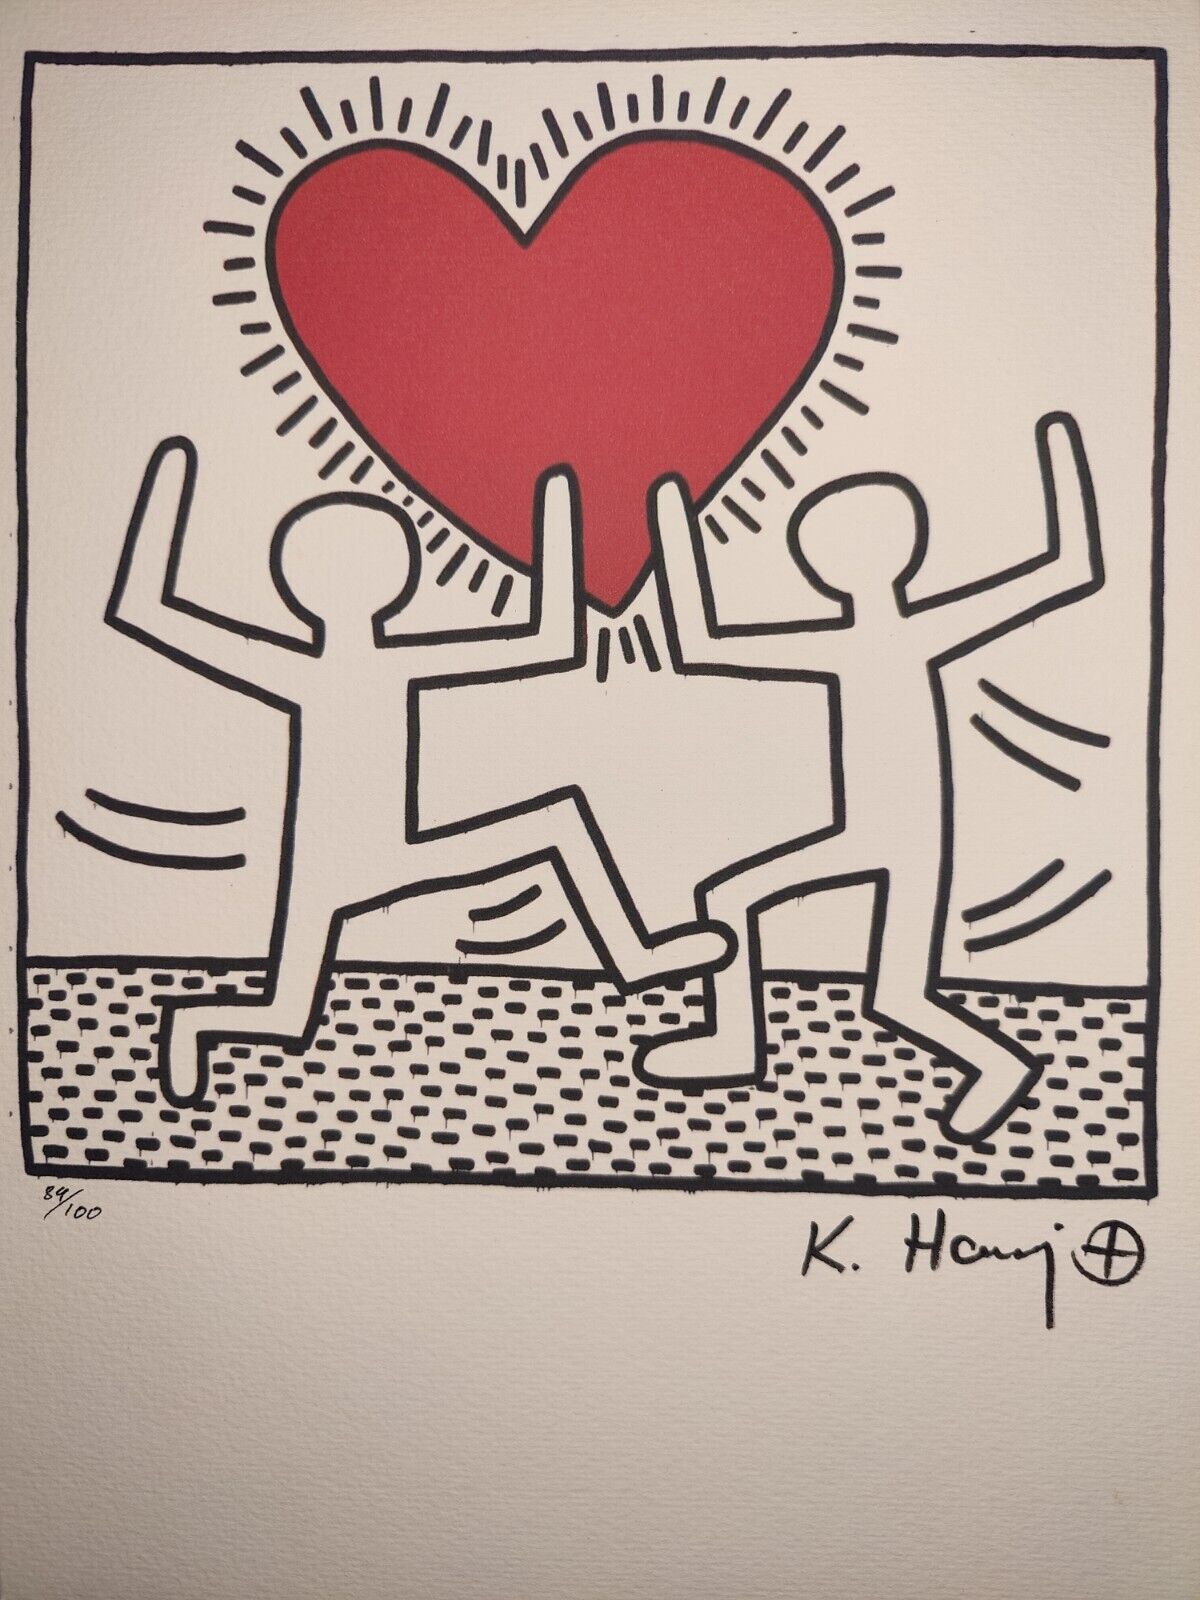 COA Keith haring Painting Print Poster Wall Art Signed & Numbered